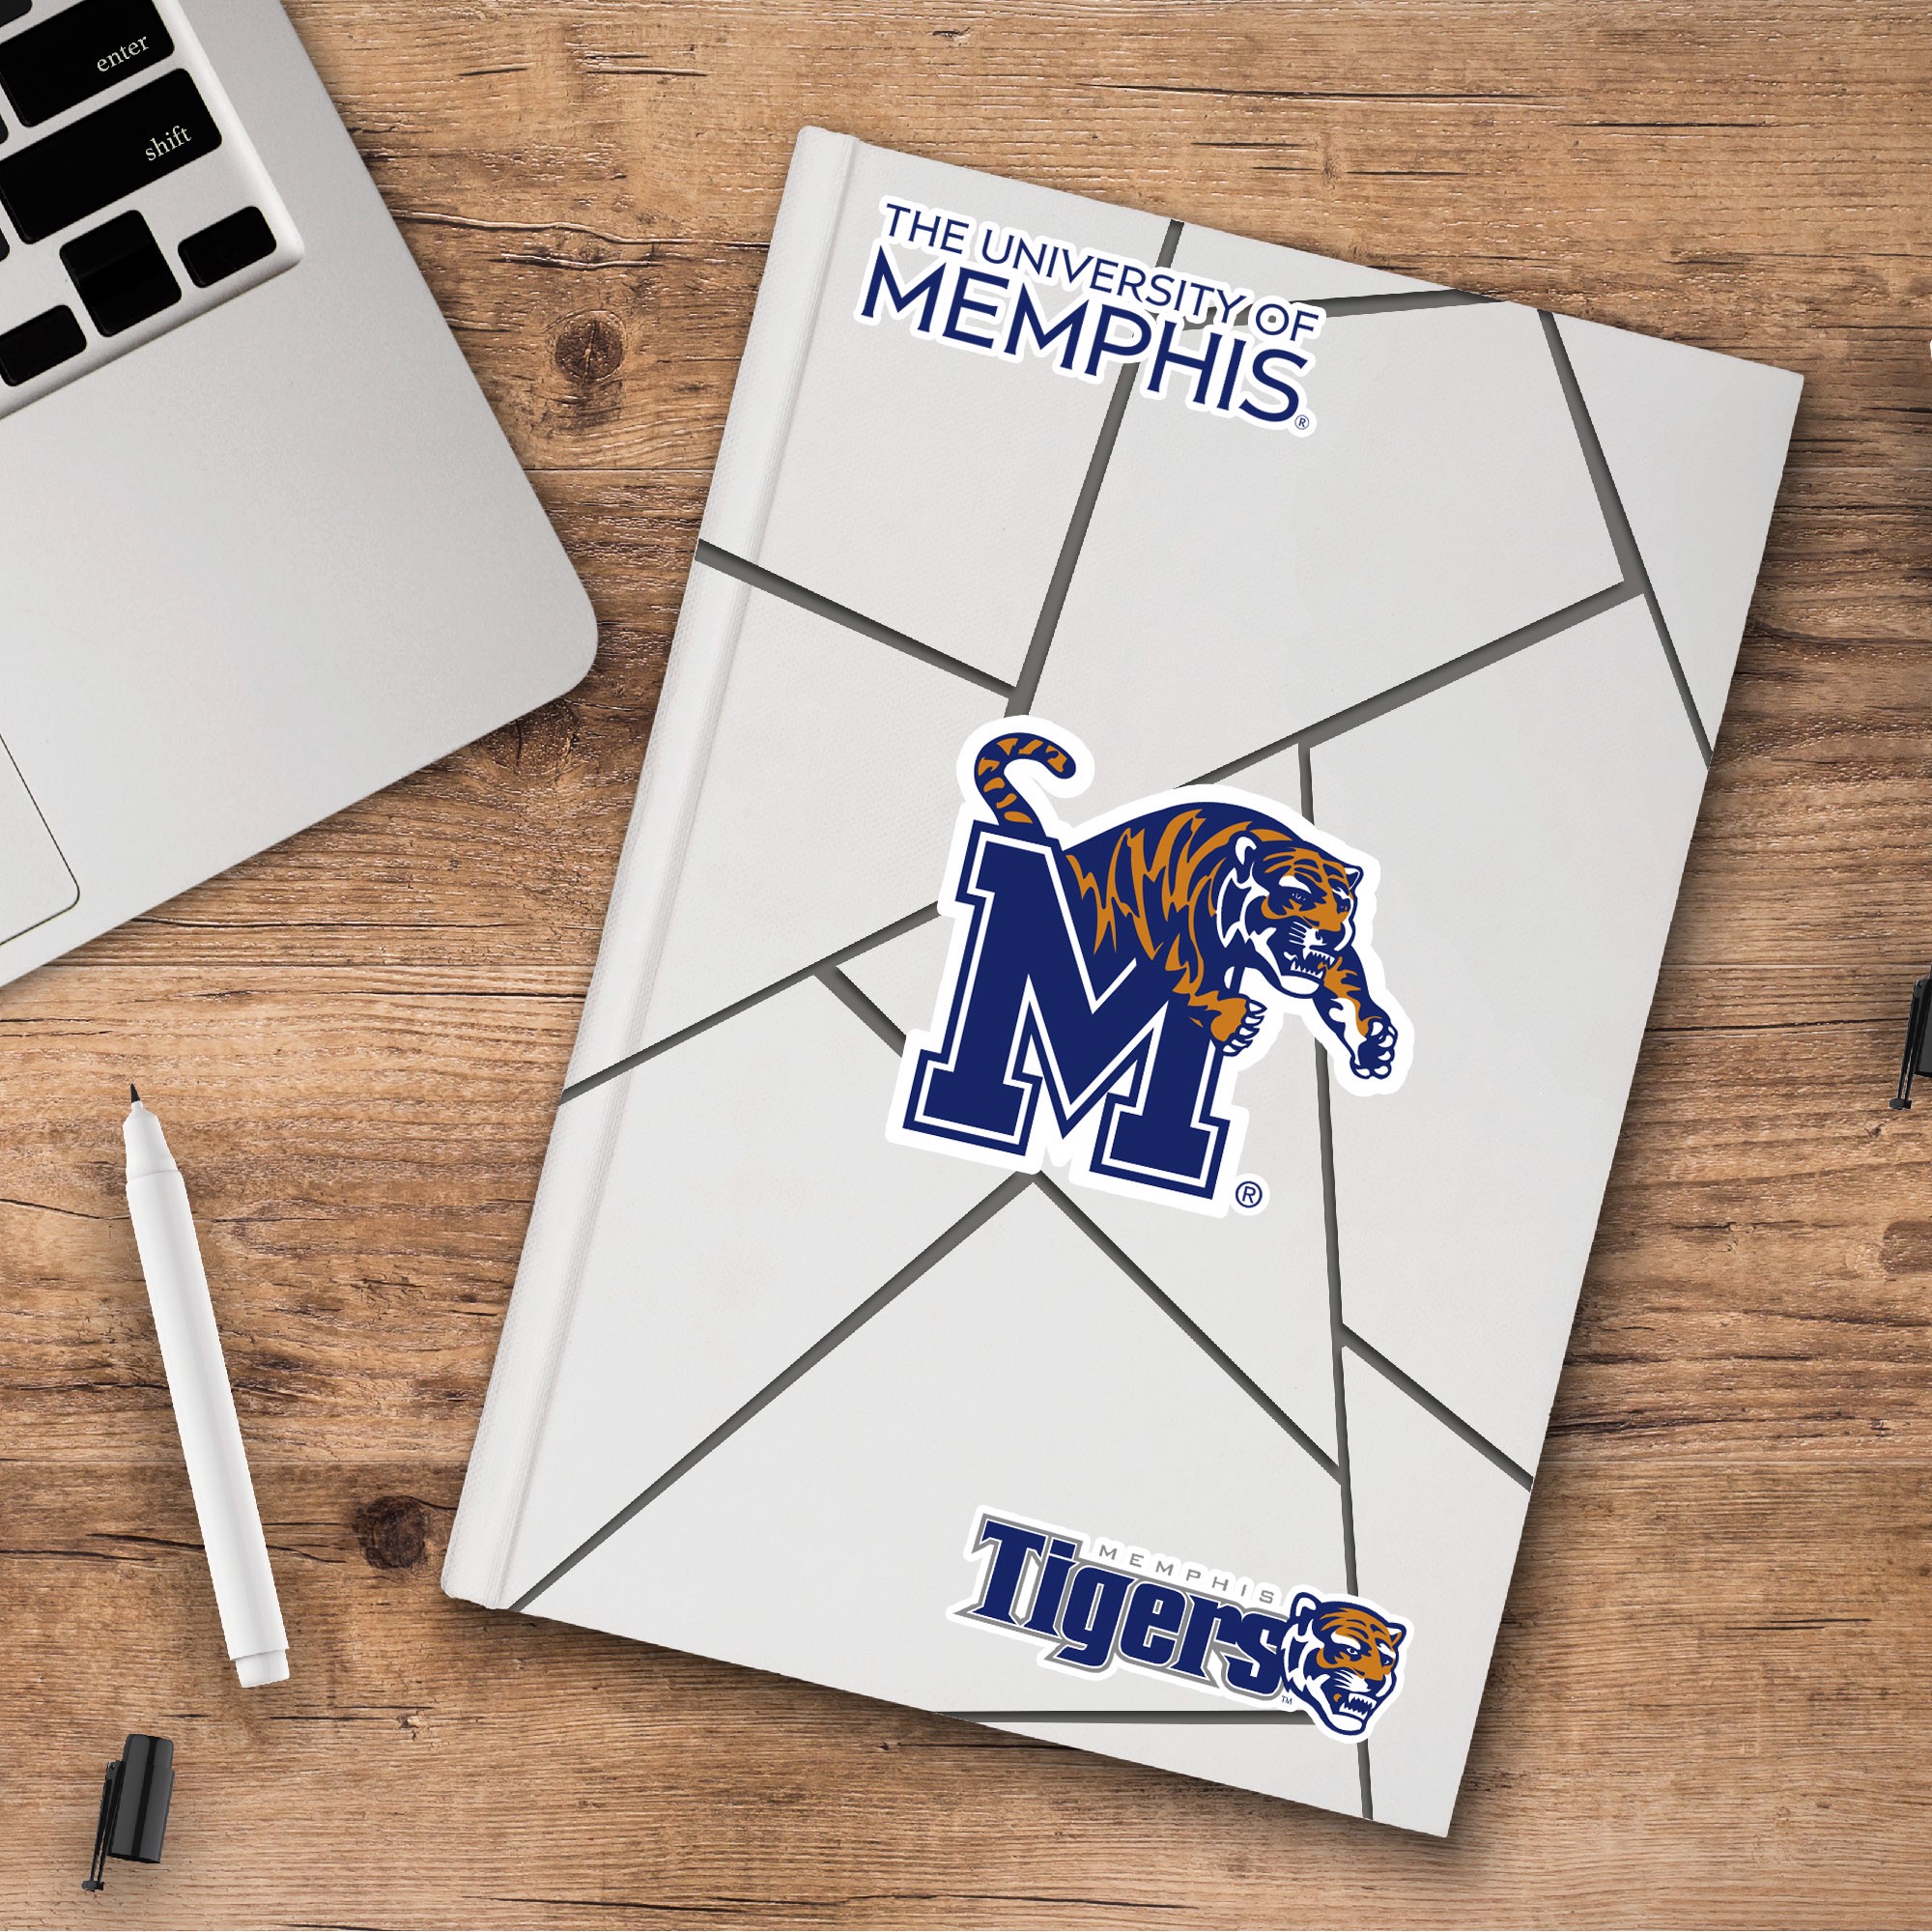  FANMATS NCAA Memphis Tigers Team Decal, 3-Pack, 61074 Blue :  Sports & Outdoors